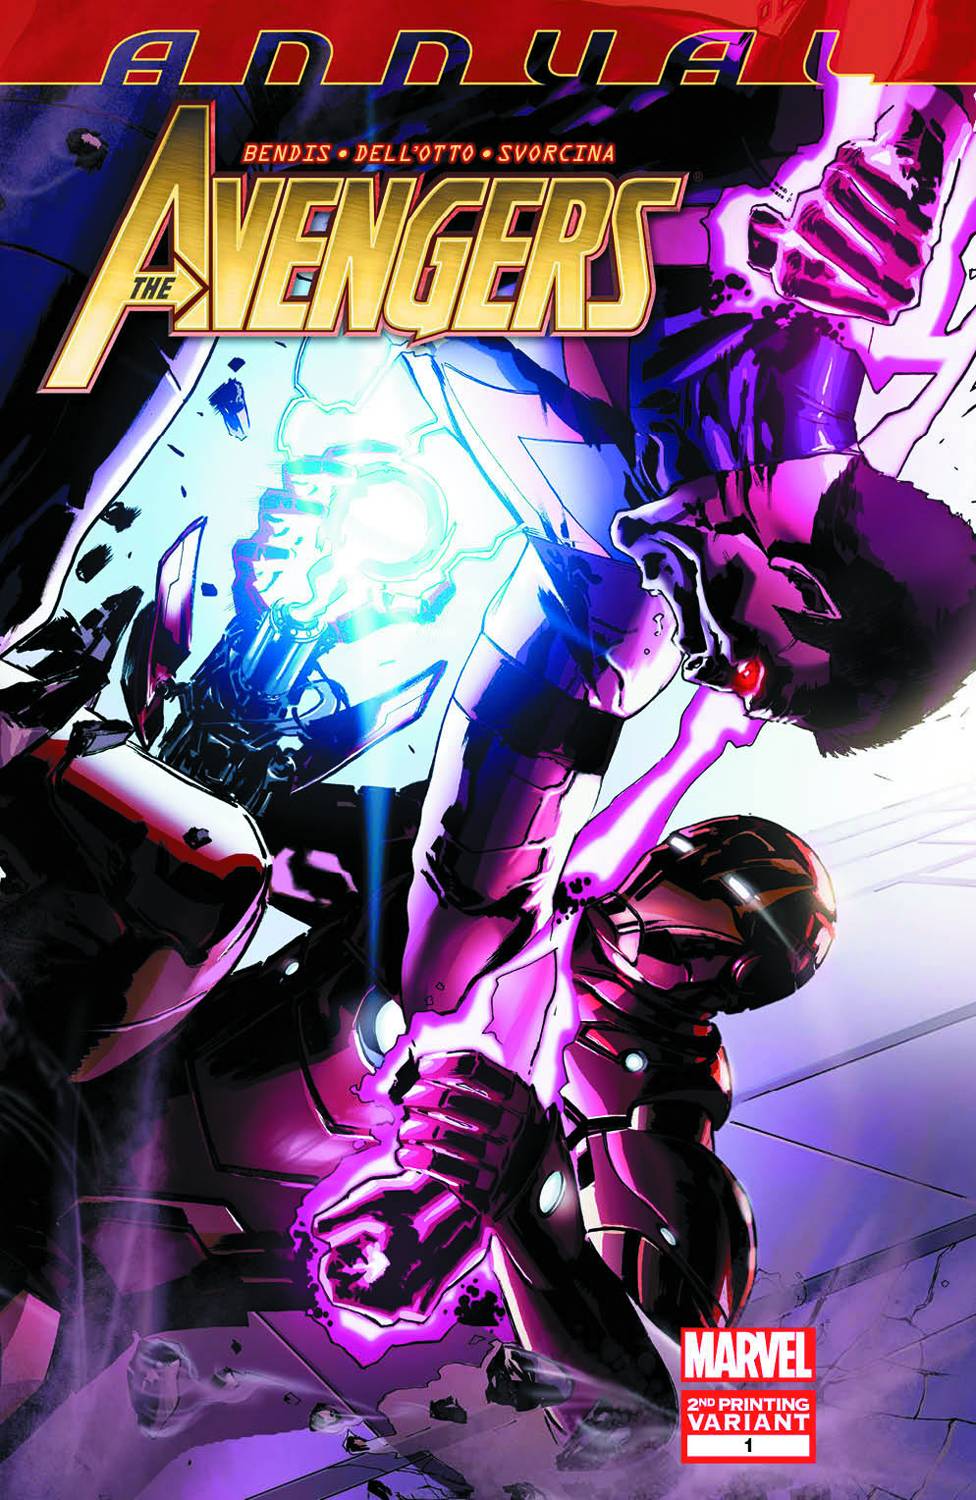 Avengers Annual #1 2nd Printing Dellotto Variant (2012)